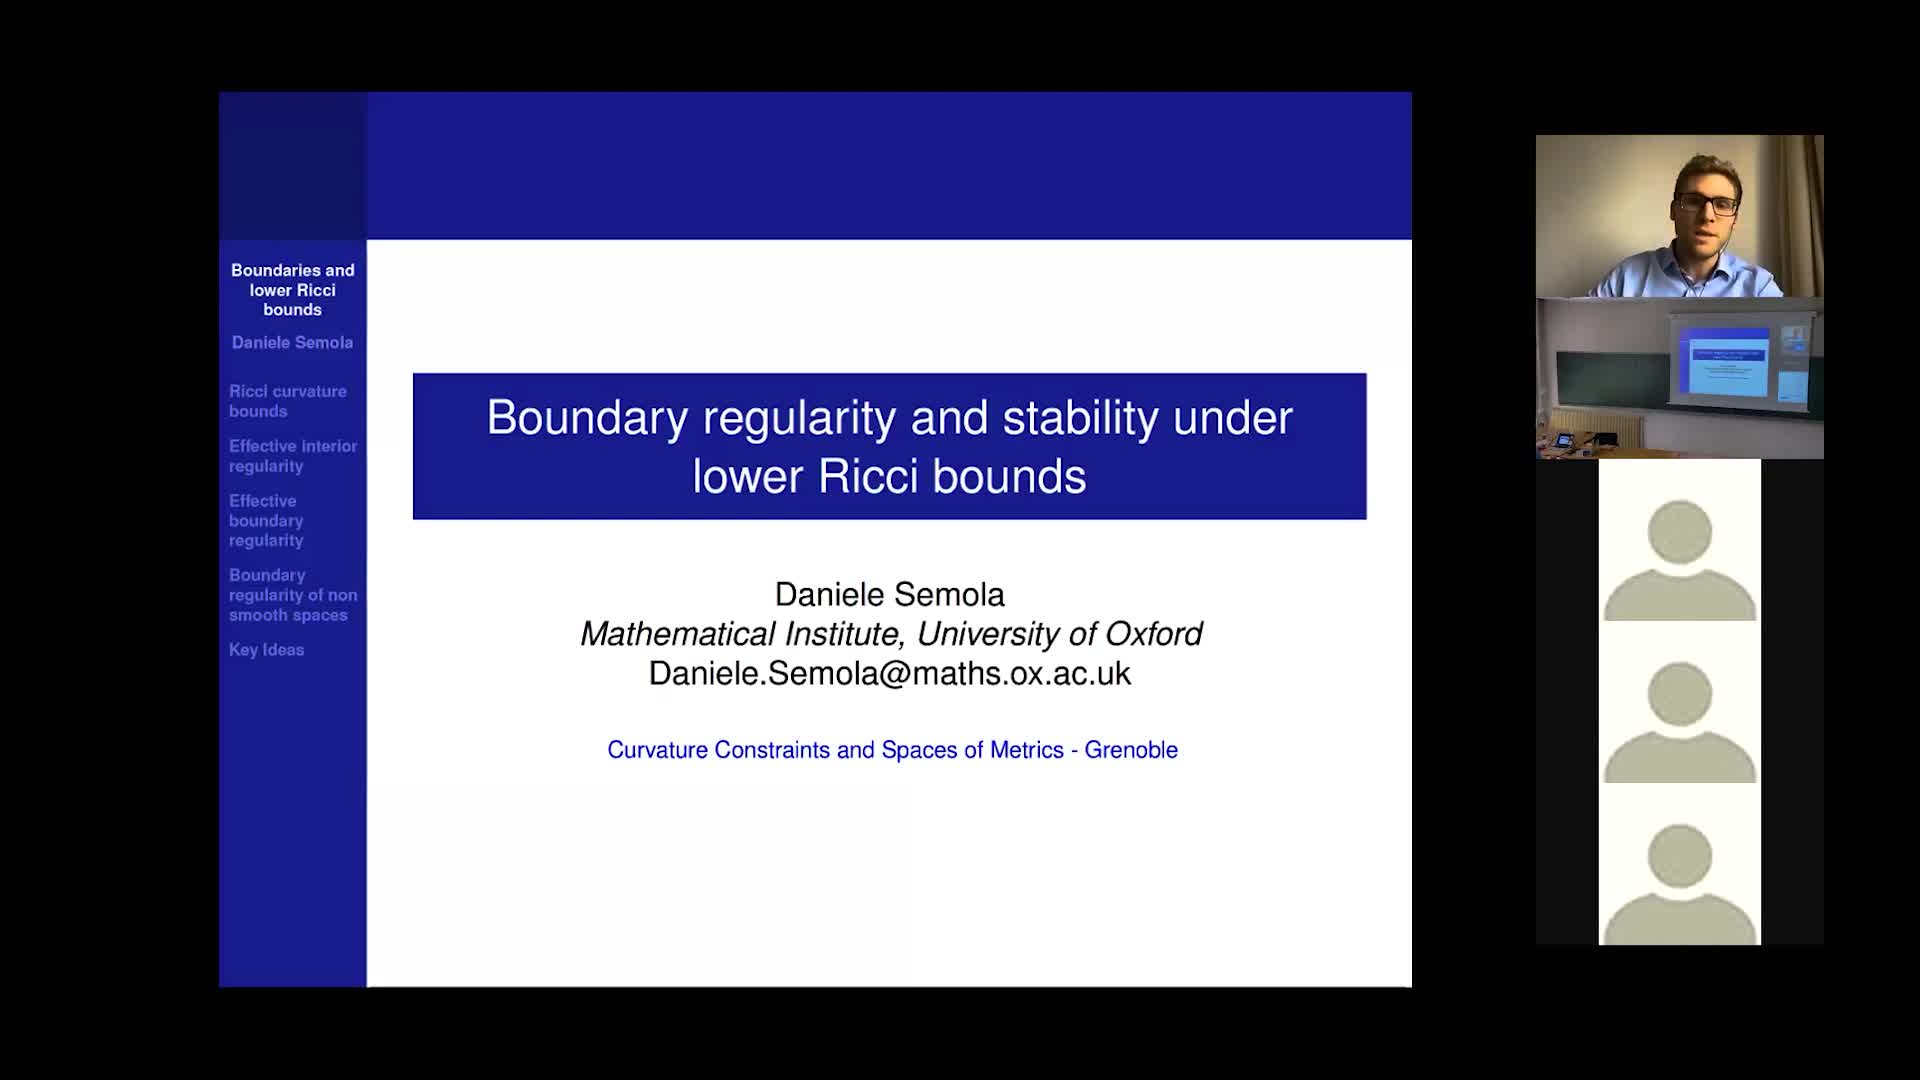 D. Semola - Boundary regularity and stability under lower Ricci bounds